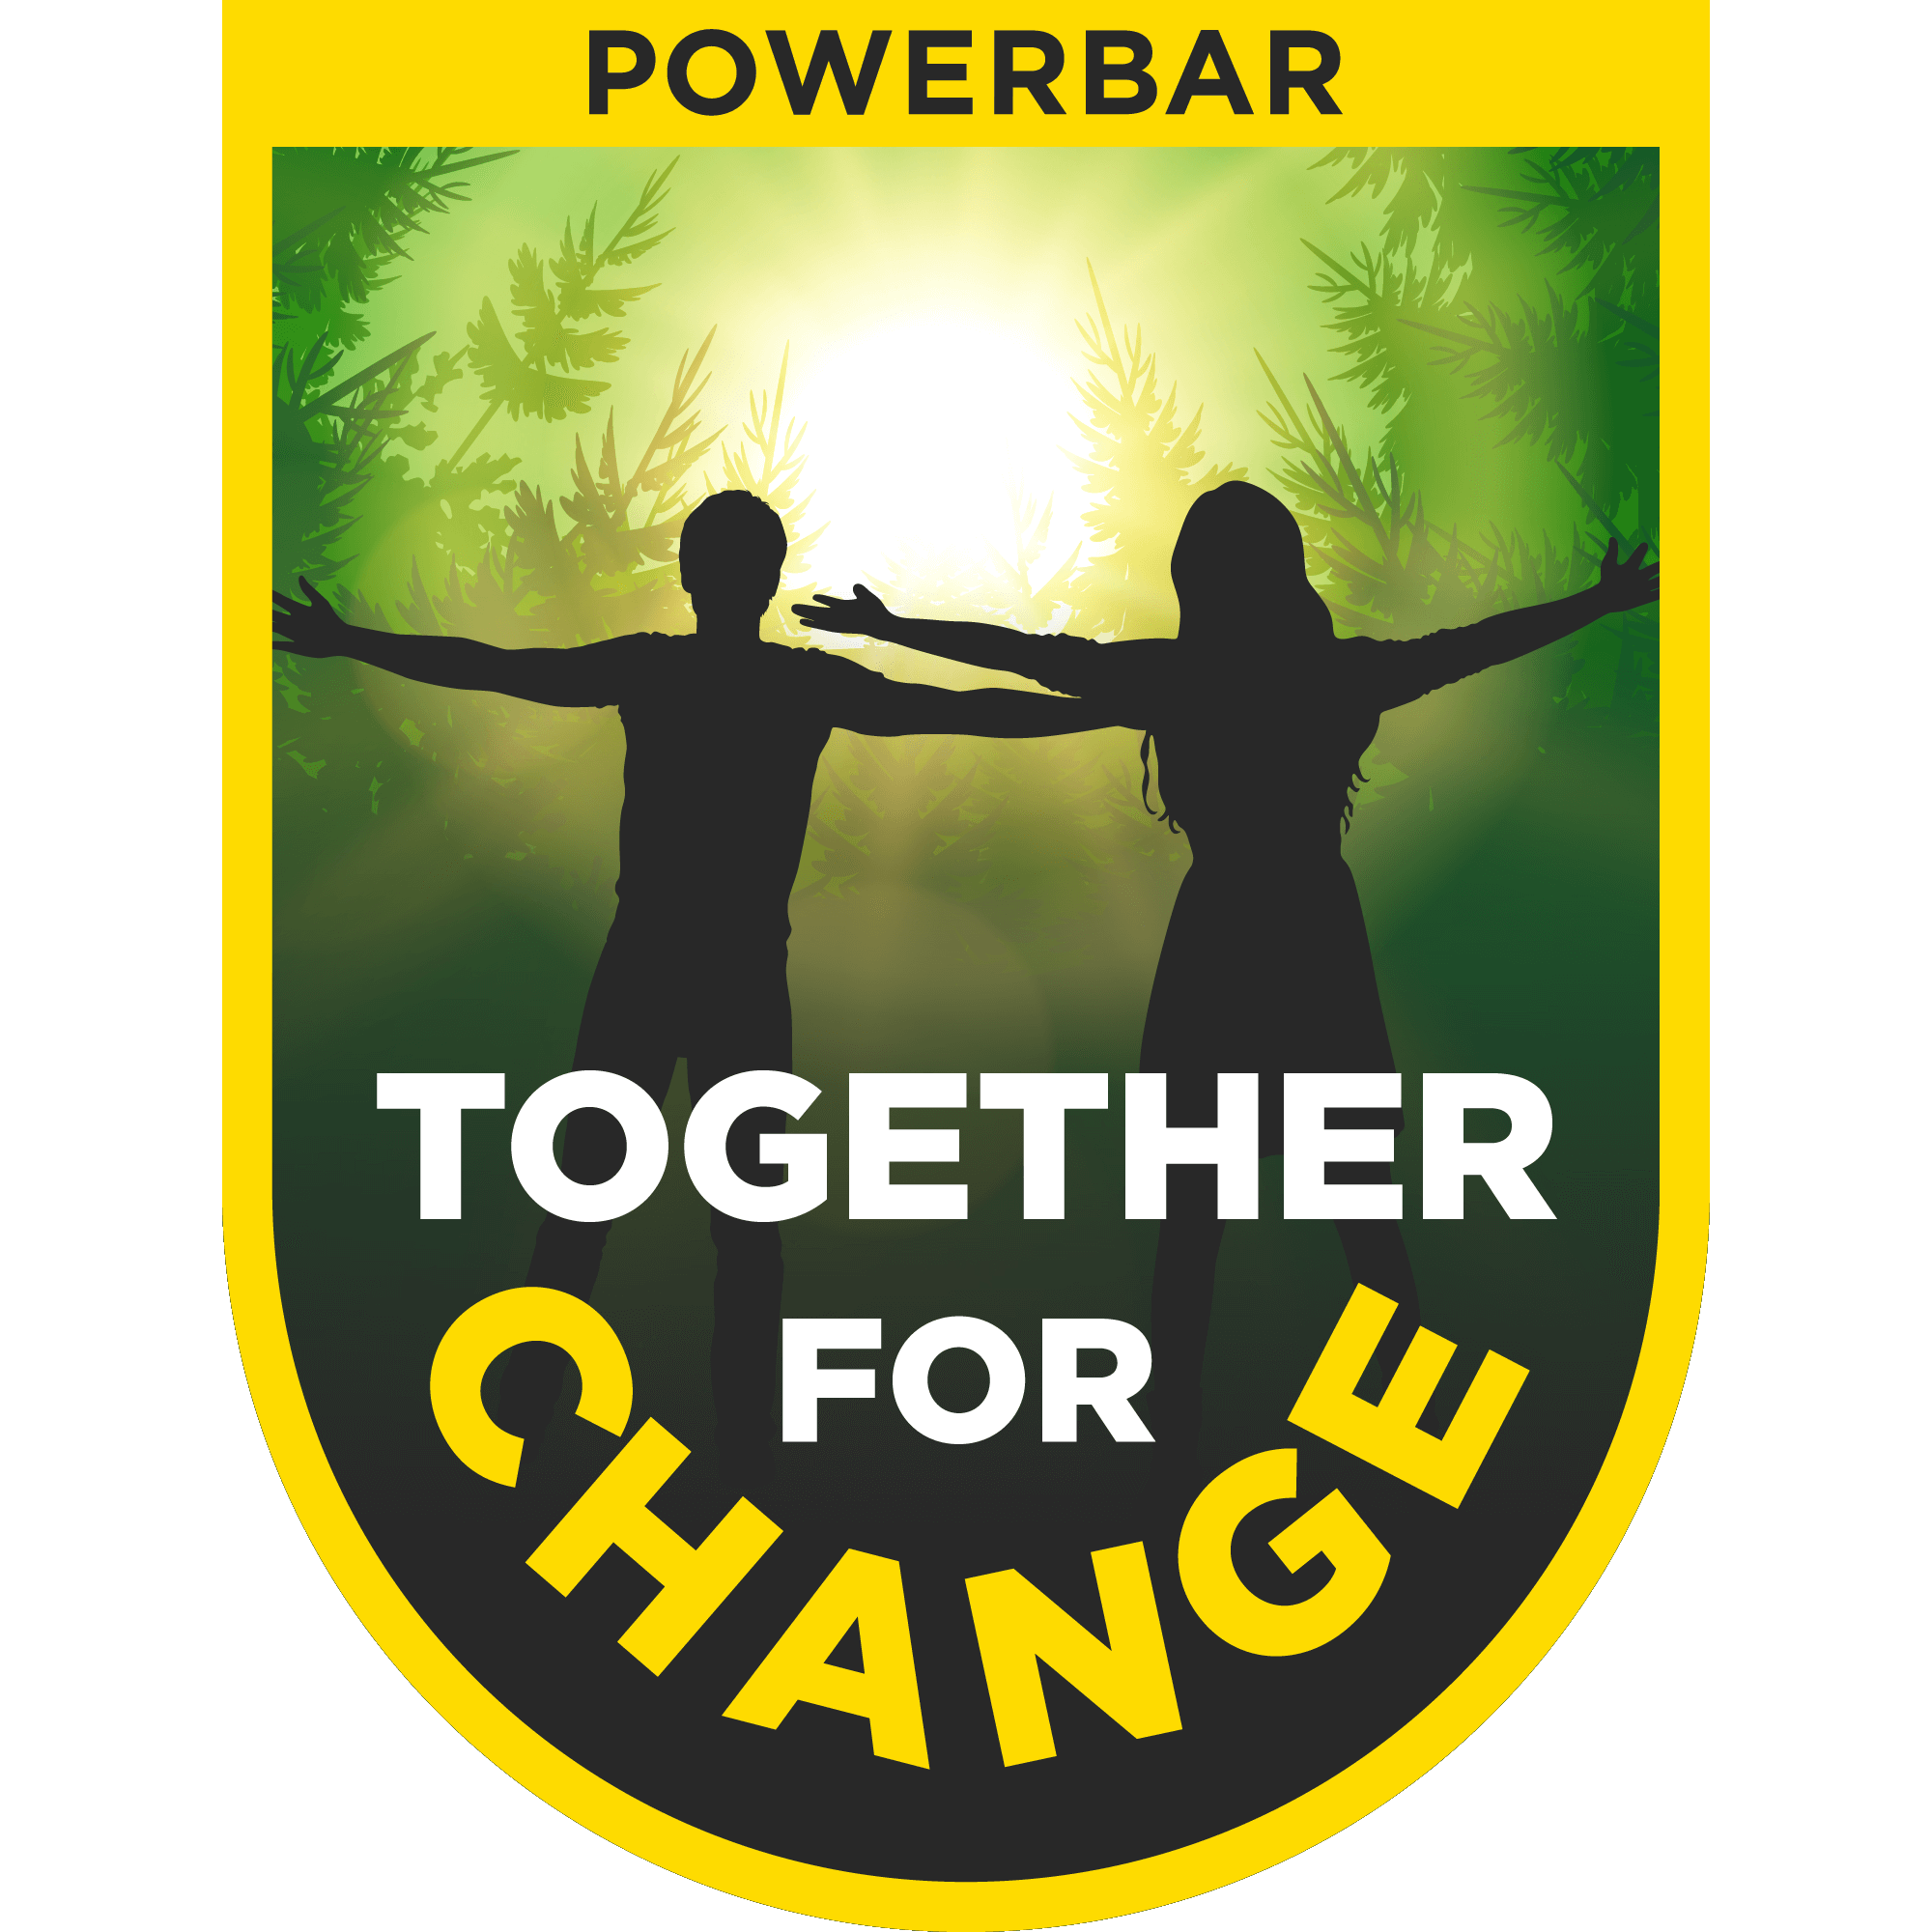 PowerBar – Together for Change